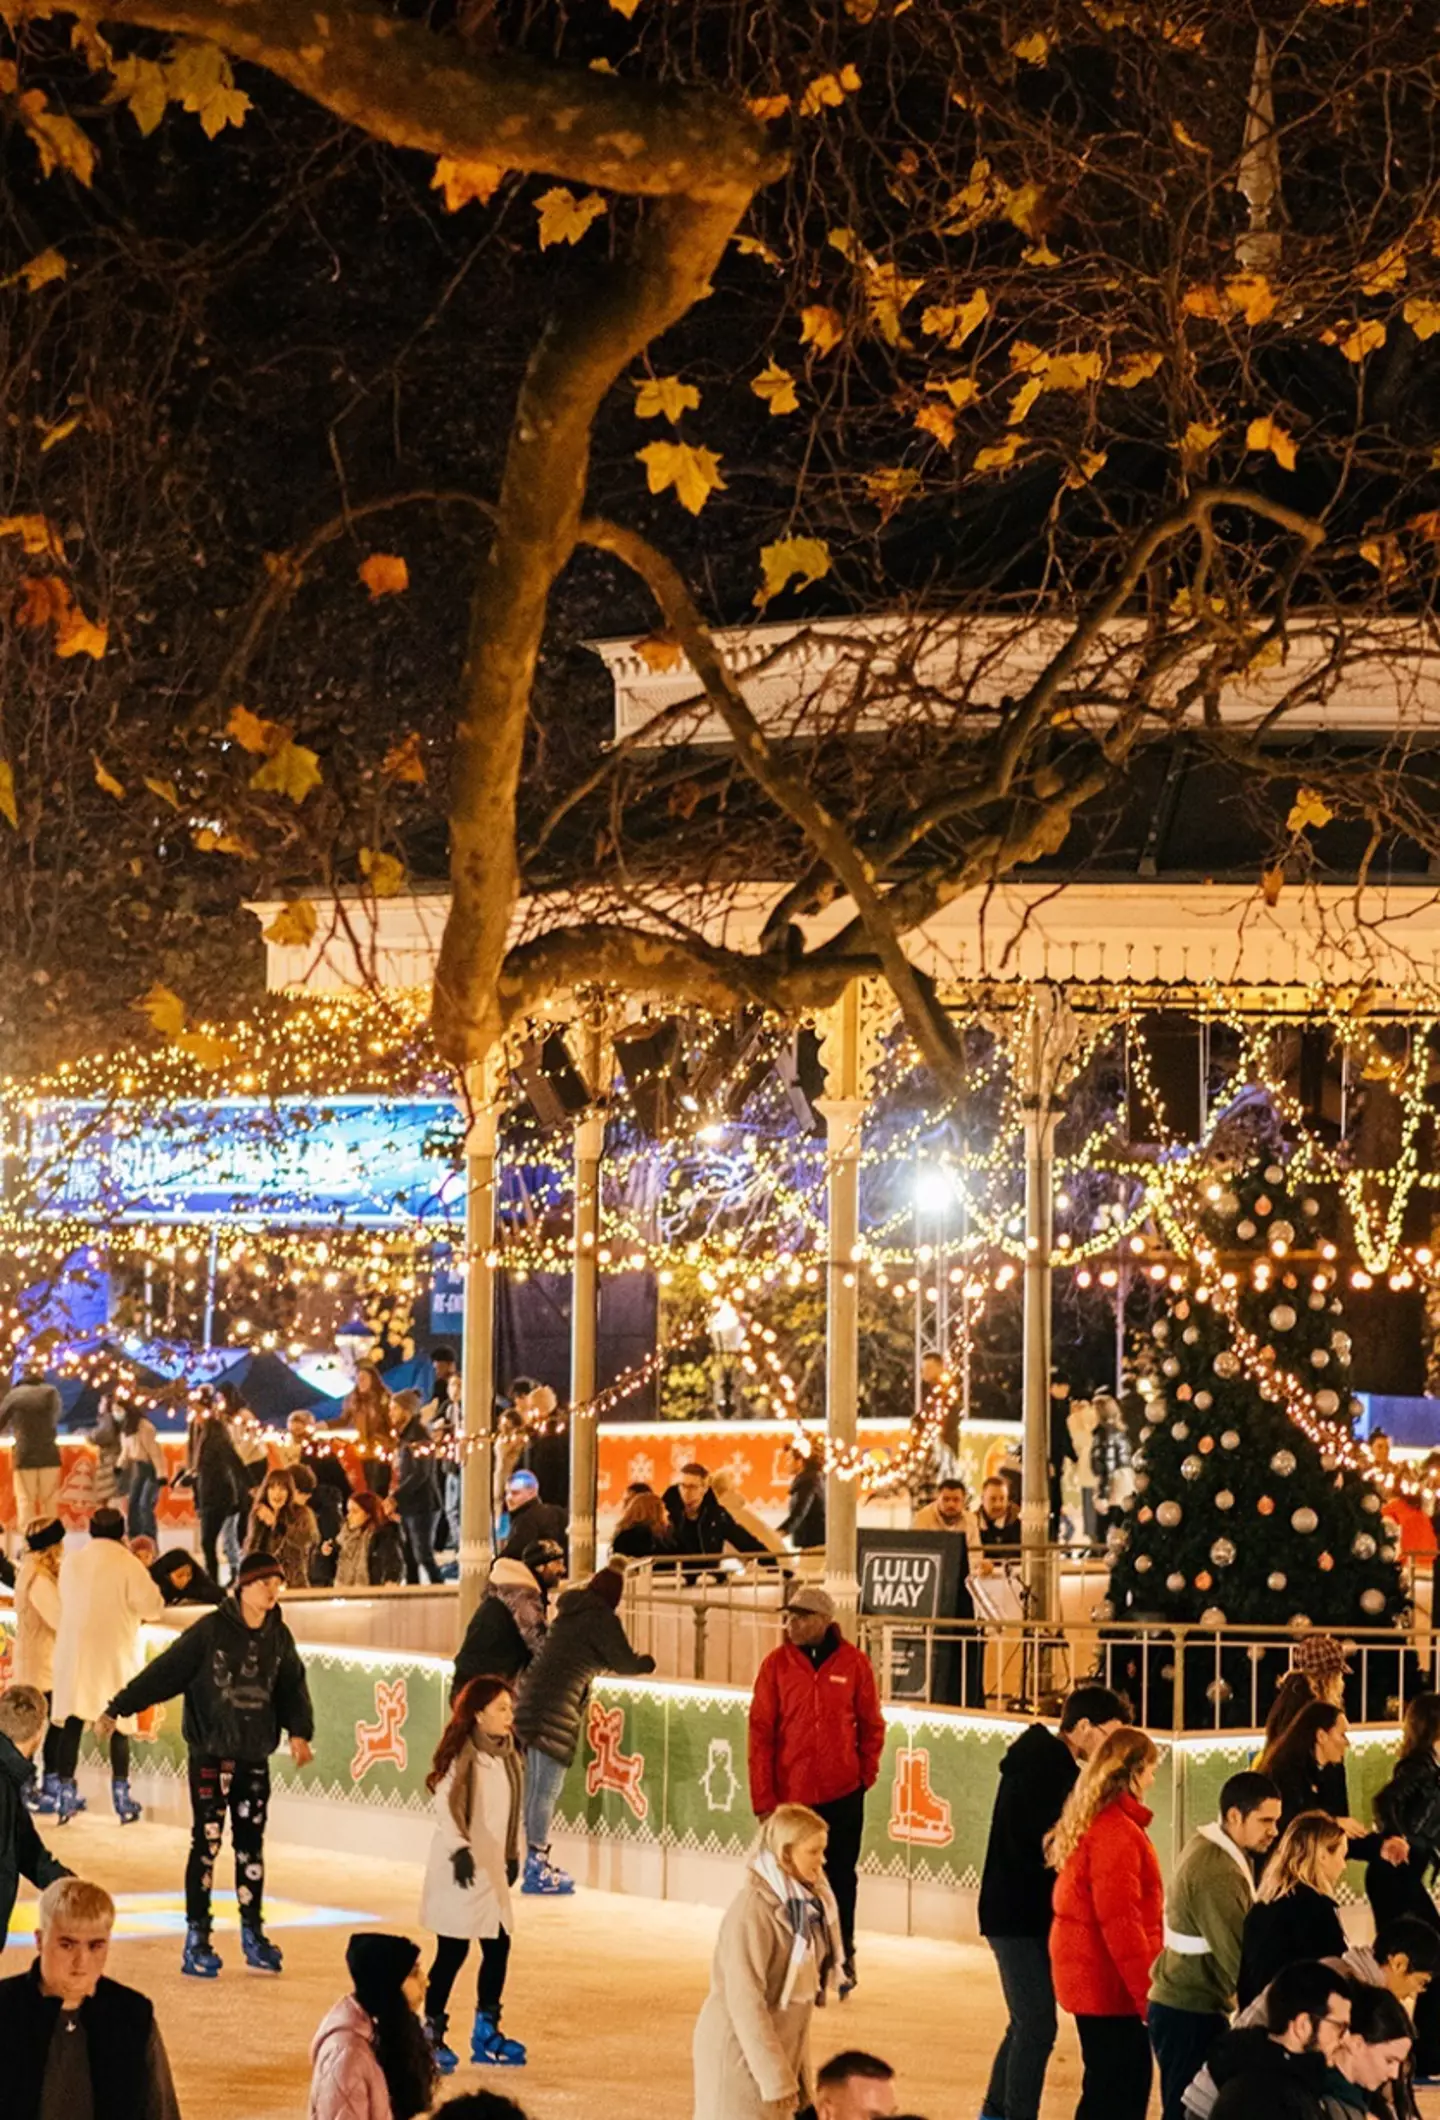 The iconic ice rink at London's Hyde Park Winter Wonderland.